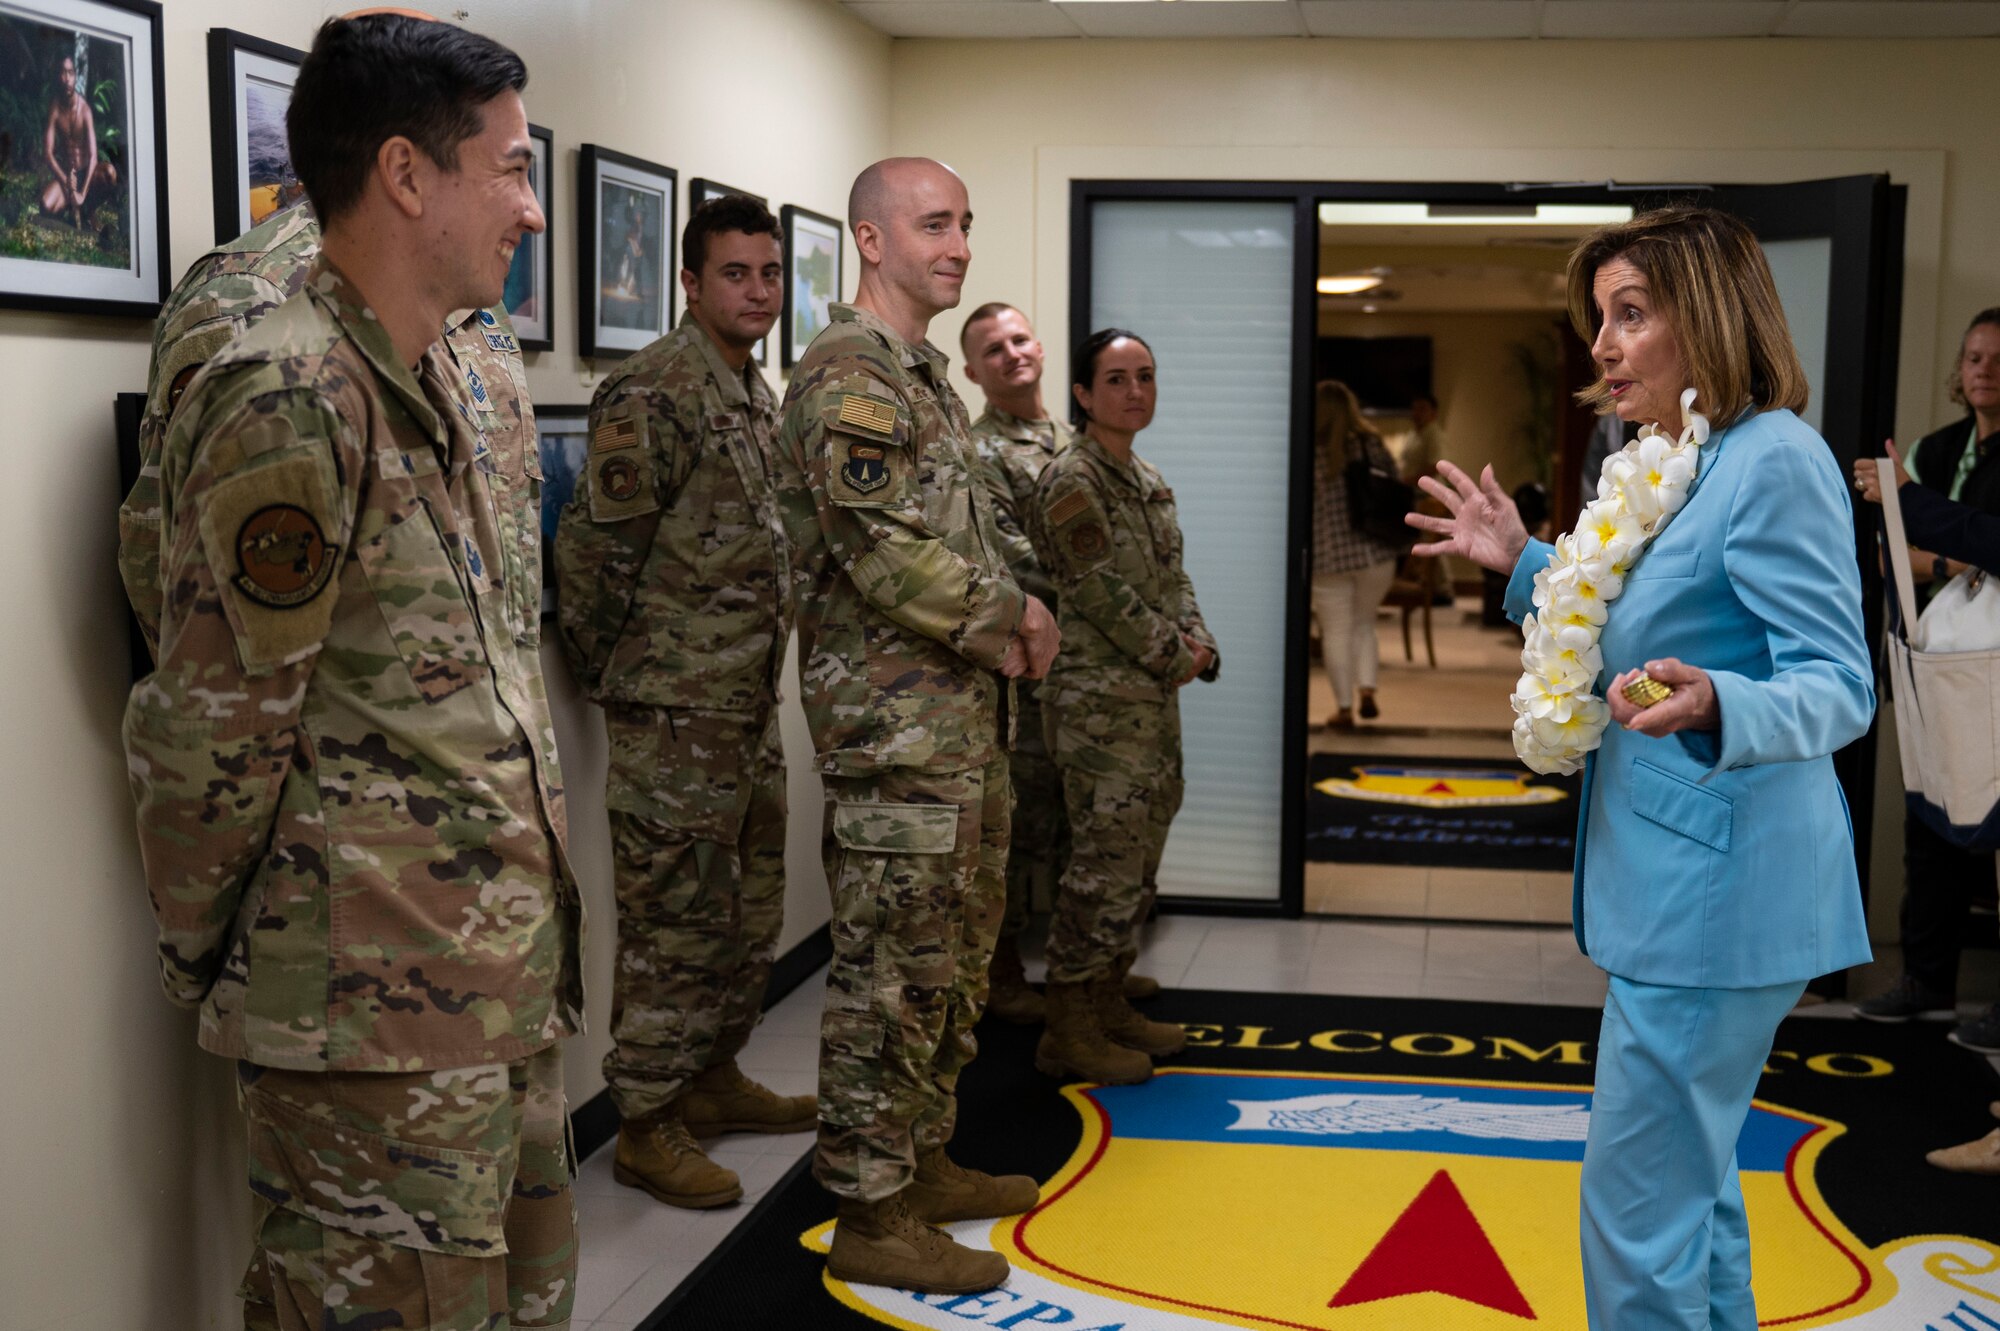 Speaker of the U.S. House of Representatives Nancy Pelosi speaks with members of Team Andersen during a visit at Andersen Air Force Base, Guam, July 31, 2022. Pelosi had the opportunity to recognize outstanding performers during her visit. (U.S. Air Force photo by Staff Sgt. Suzie Plotnikov)